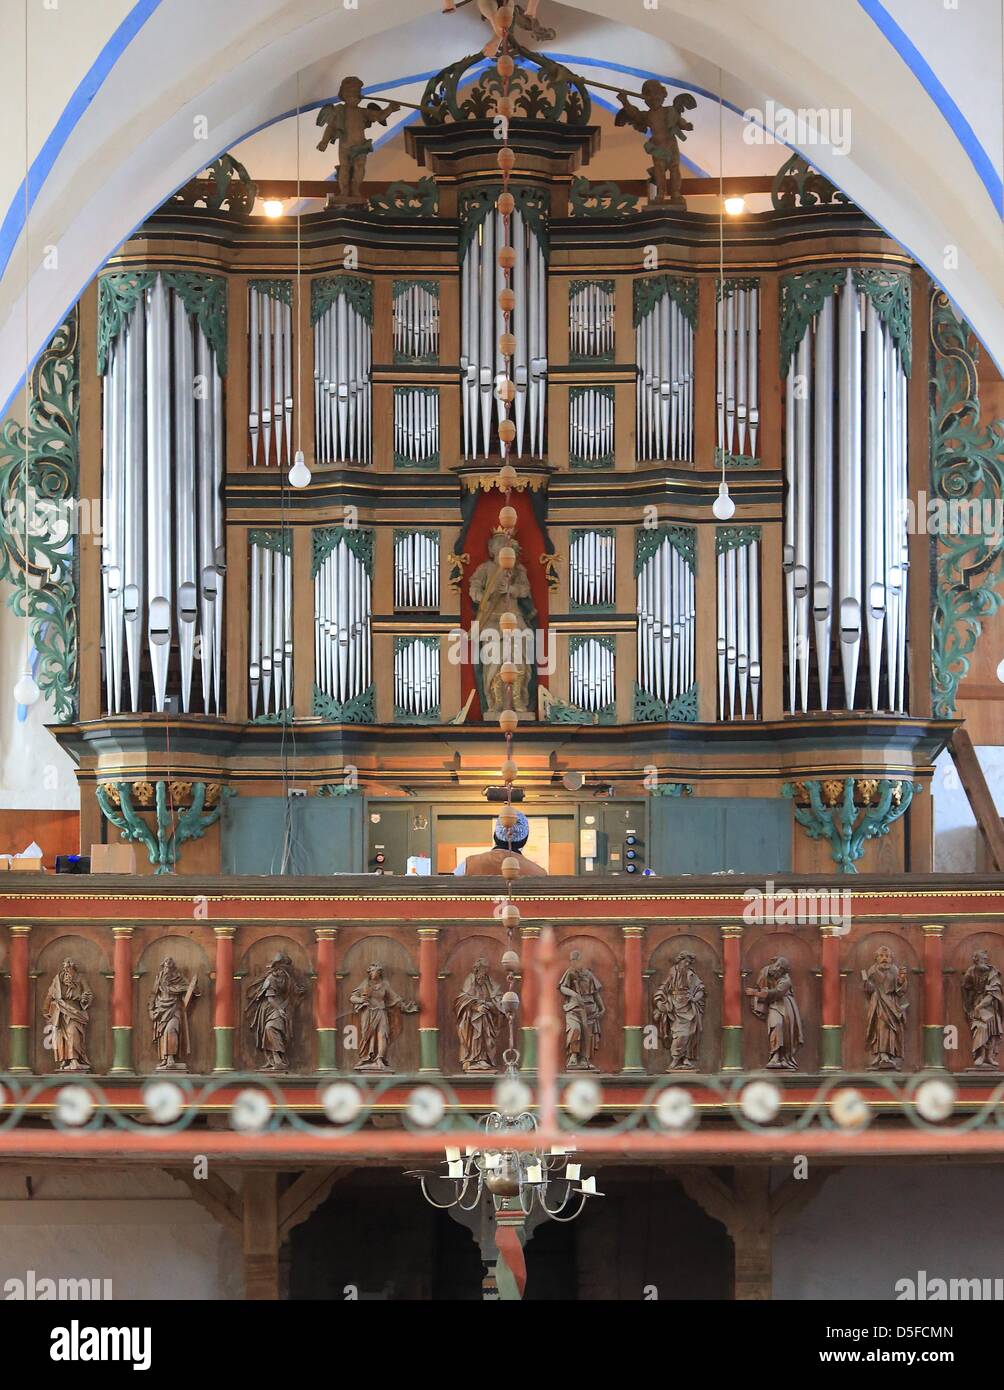 View of the organ in the protestant church 'Sankt Marien' in Gardelegen,  Germany, 26 March 2013. Organ builders are fighting mould formation in the  organ with its 1,398 pipes. Photo: Jens Wolf